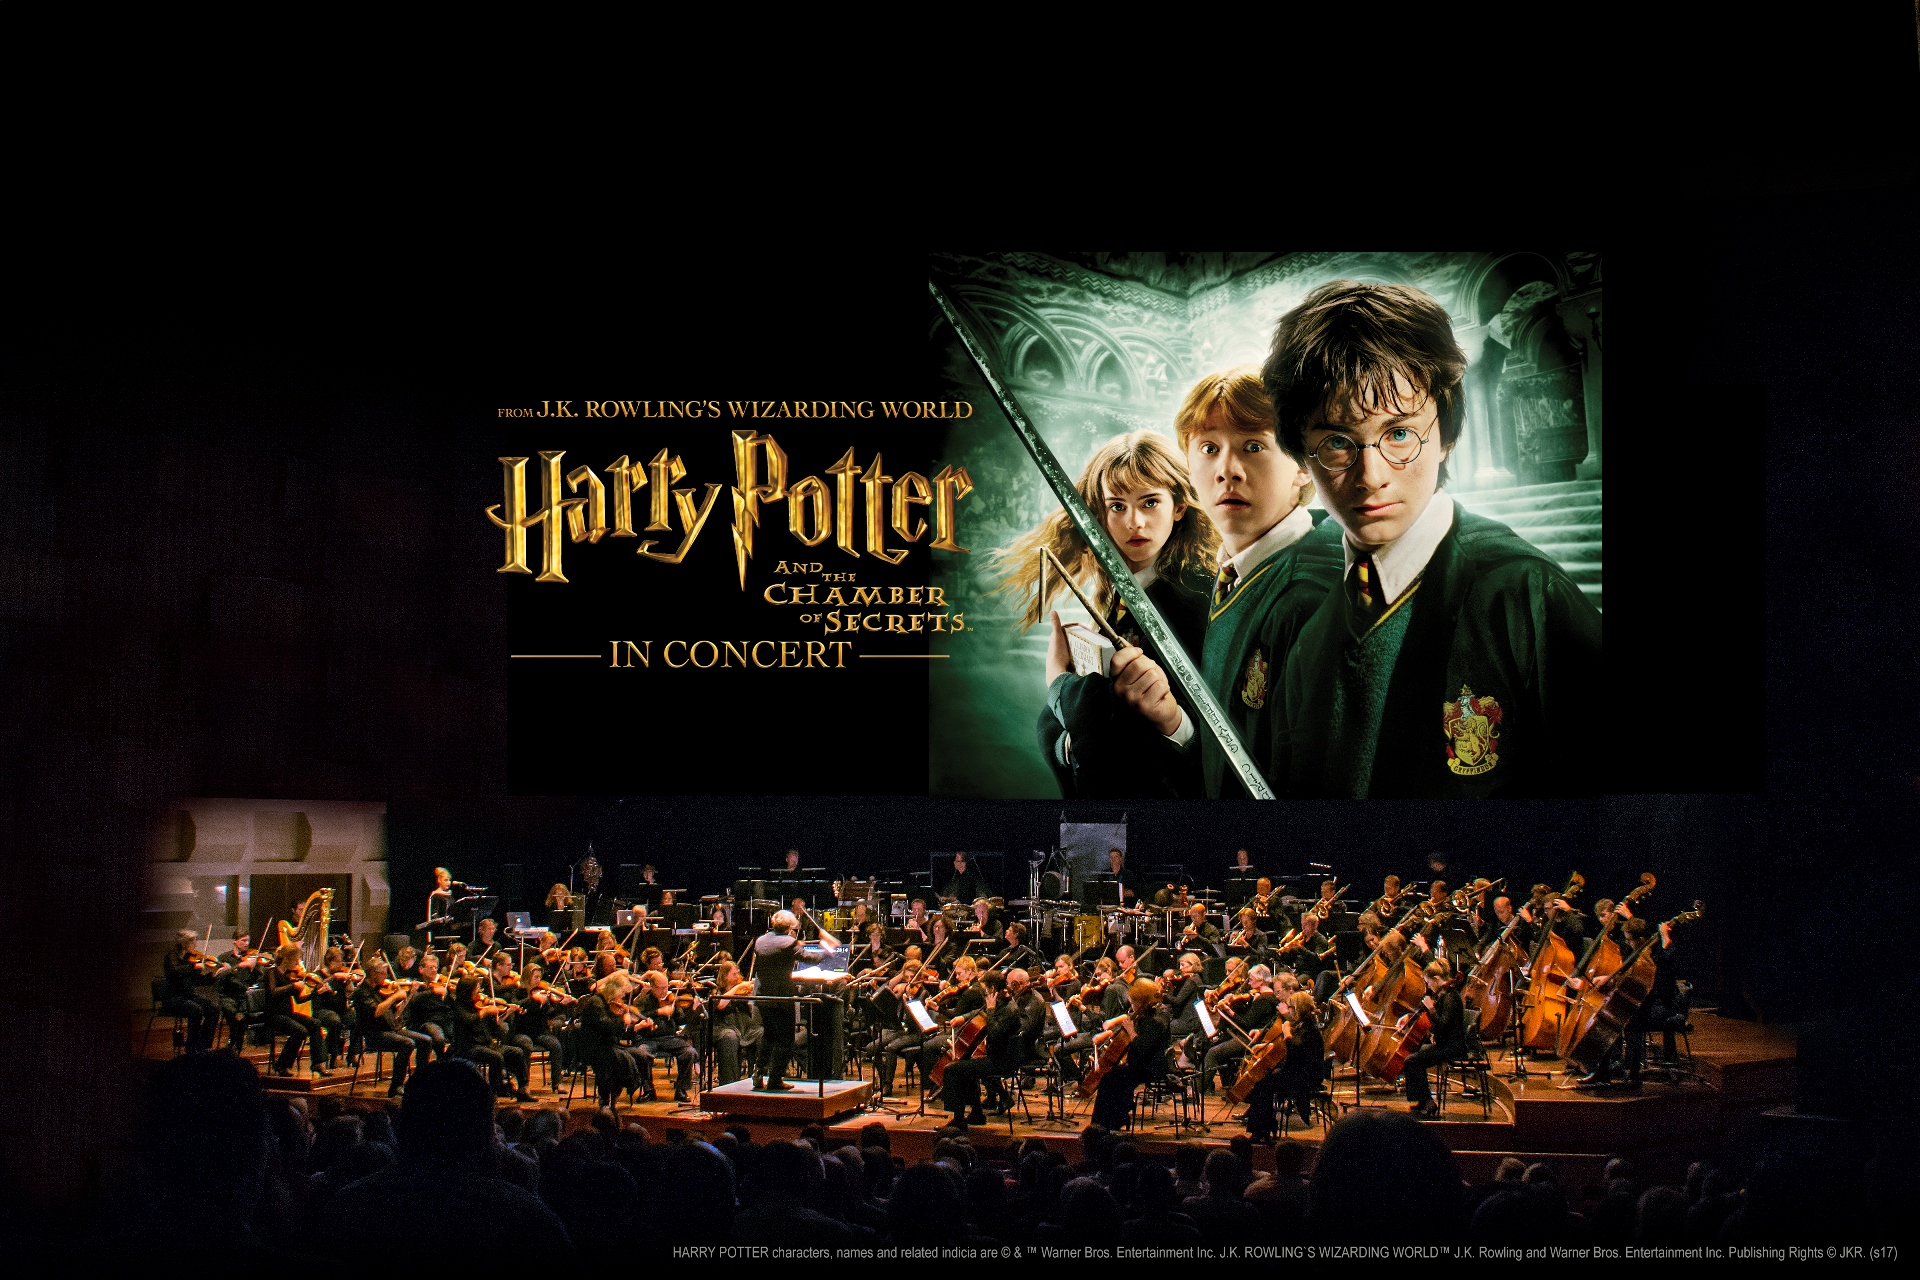 Harry Potter with orchestra c Warner Bros